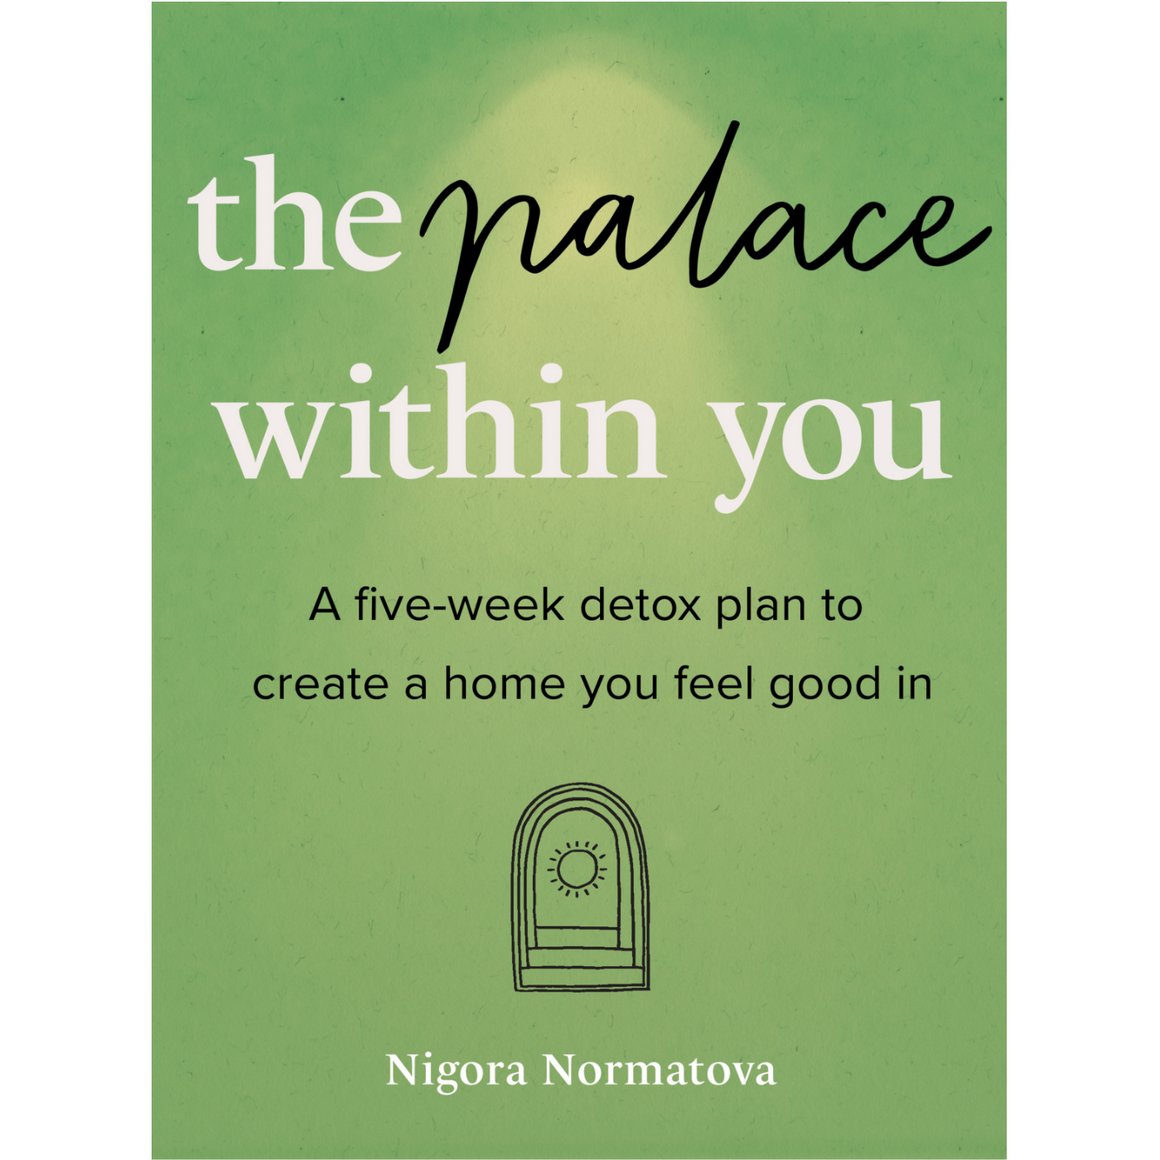 THE PALACE WITHIN YOU